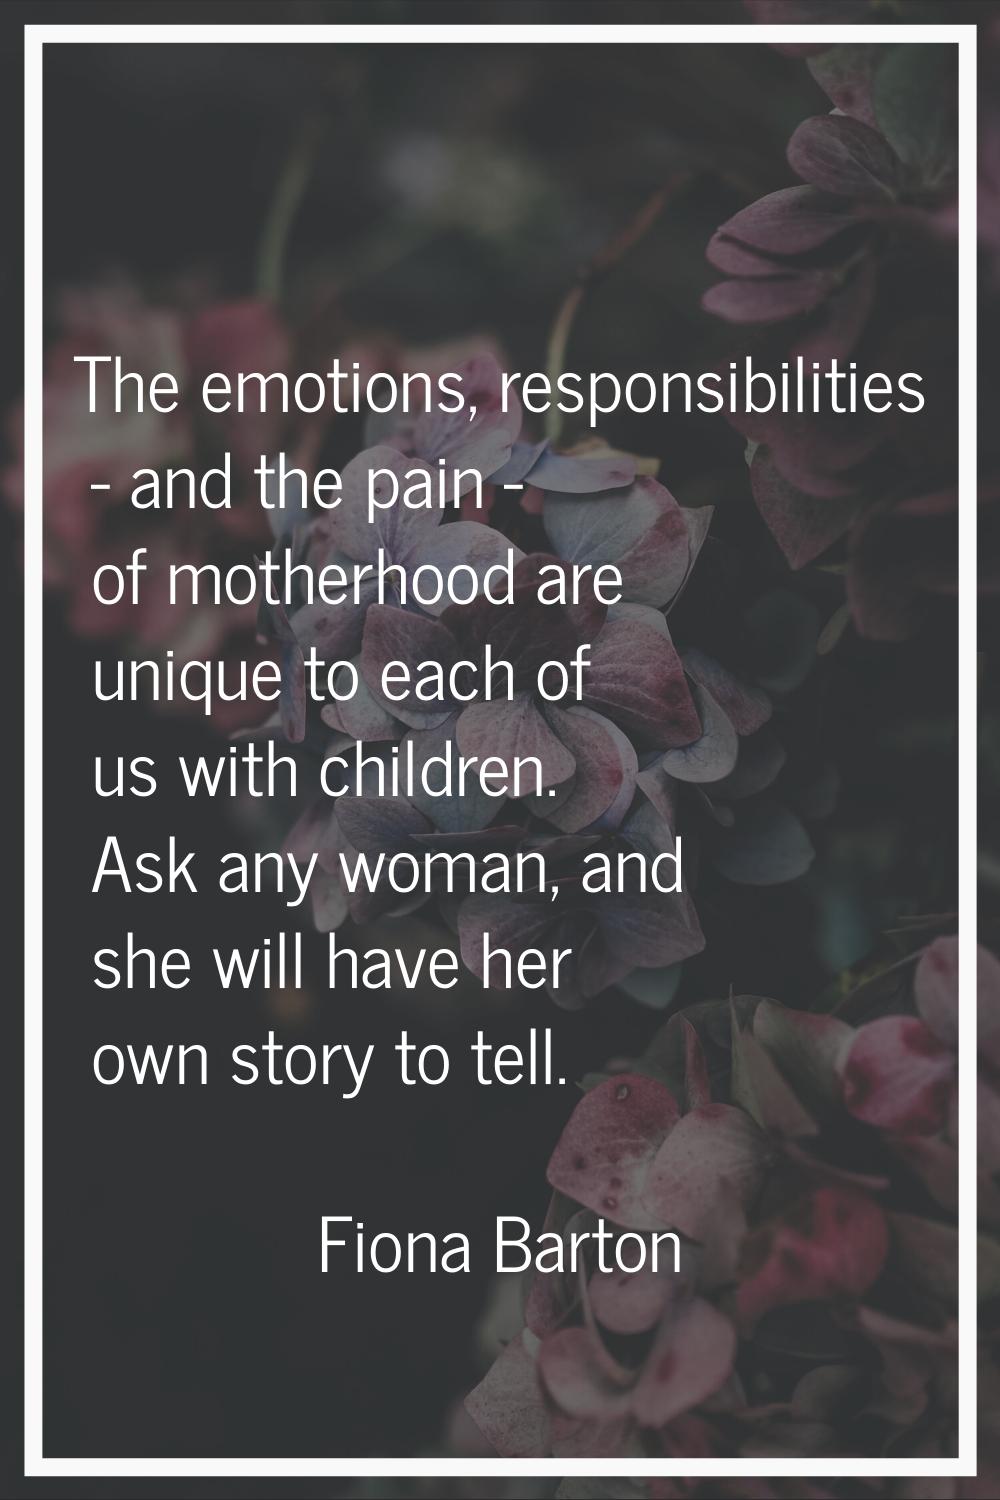 The emotions, responsibilities - and the pain - of motherhood are unique to each of us with childre